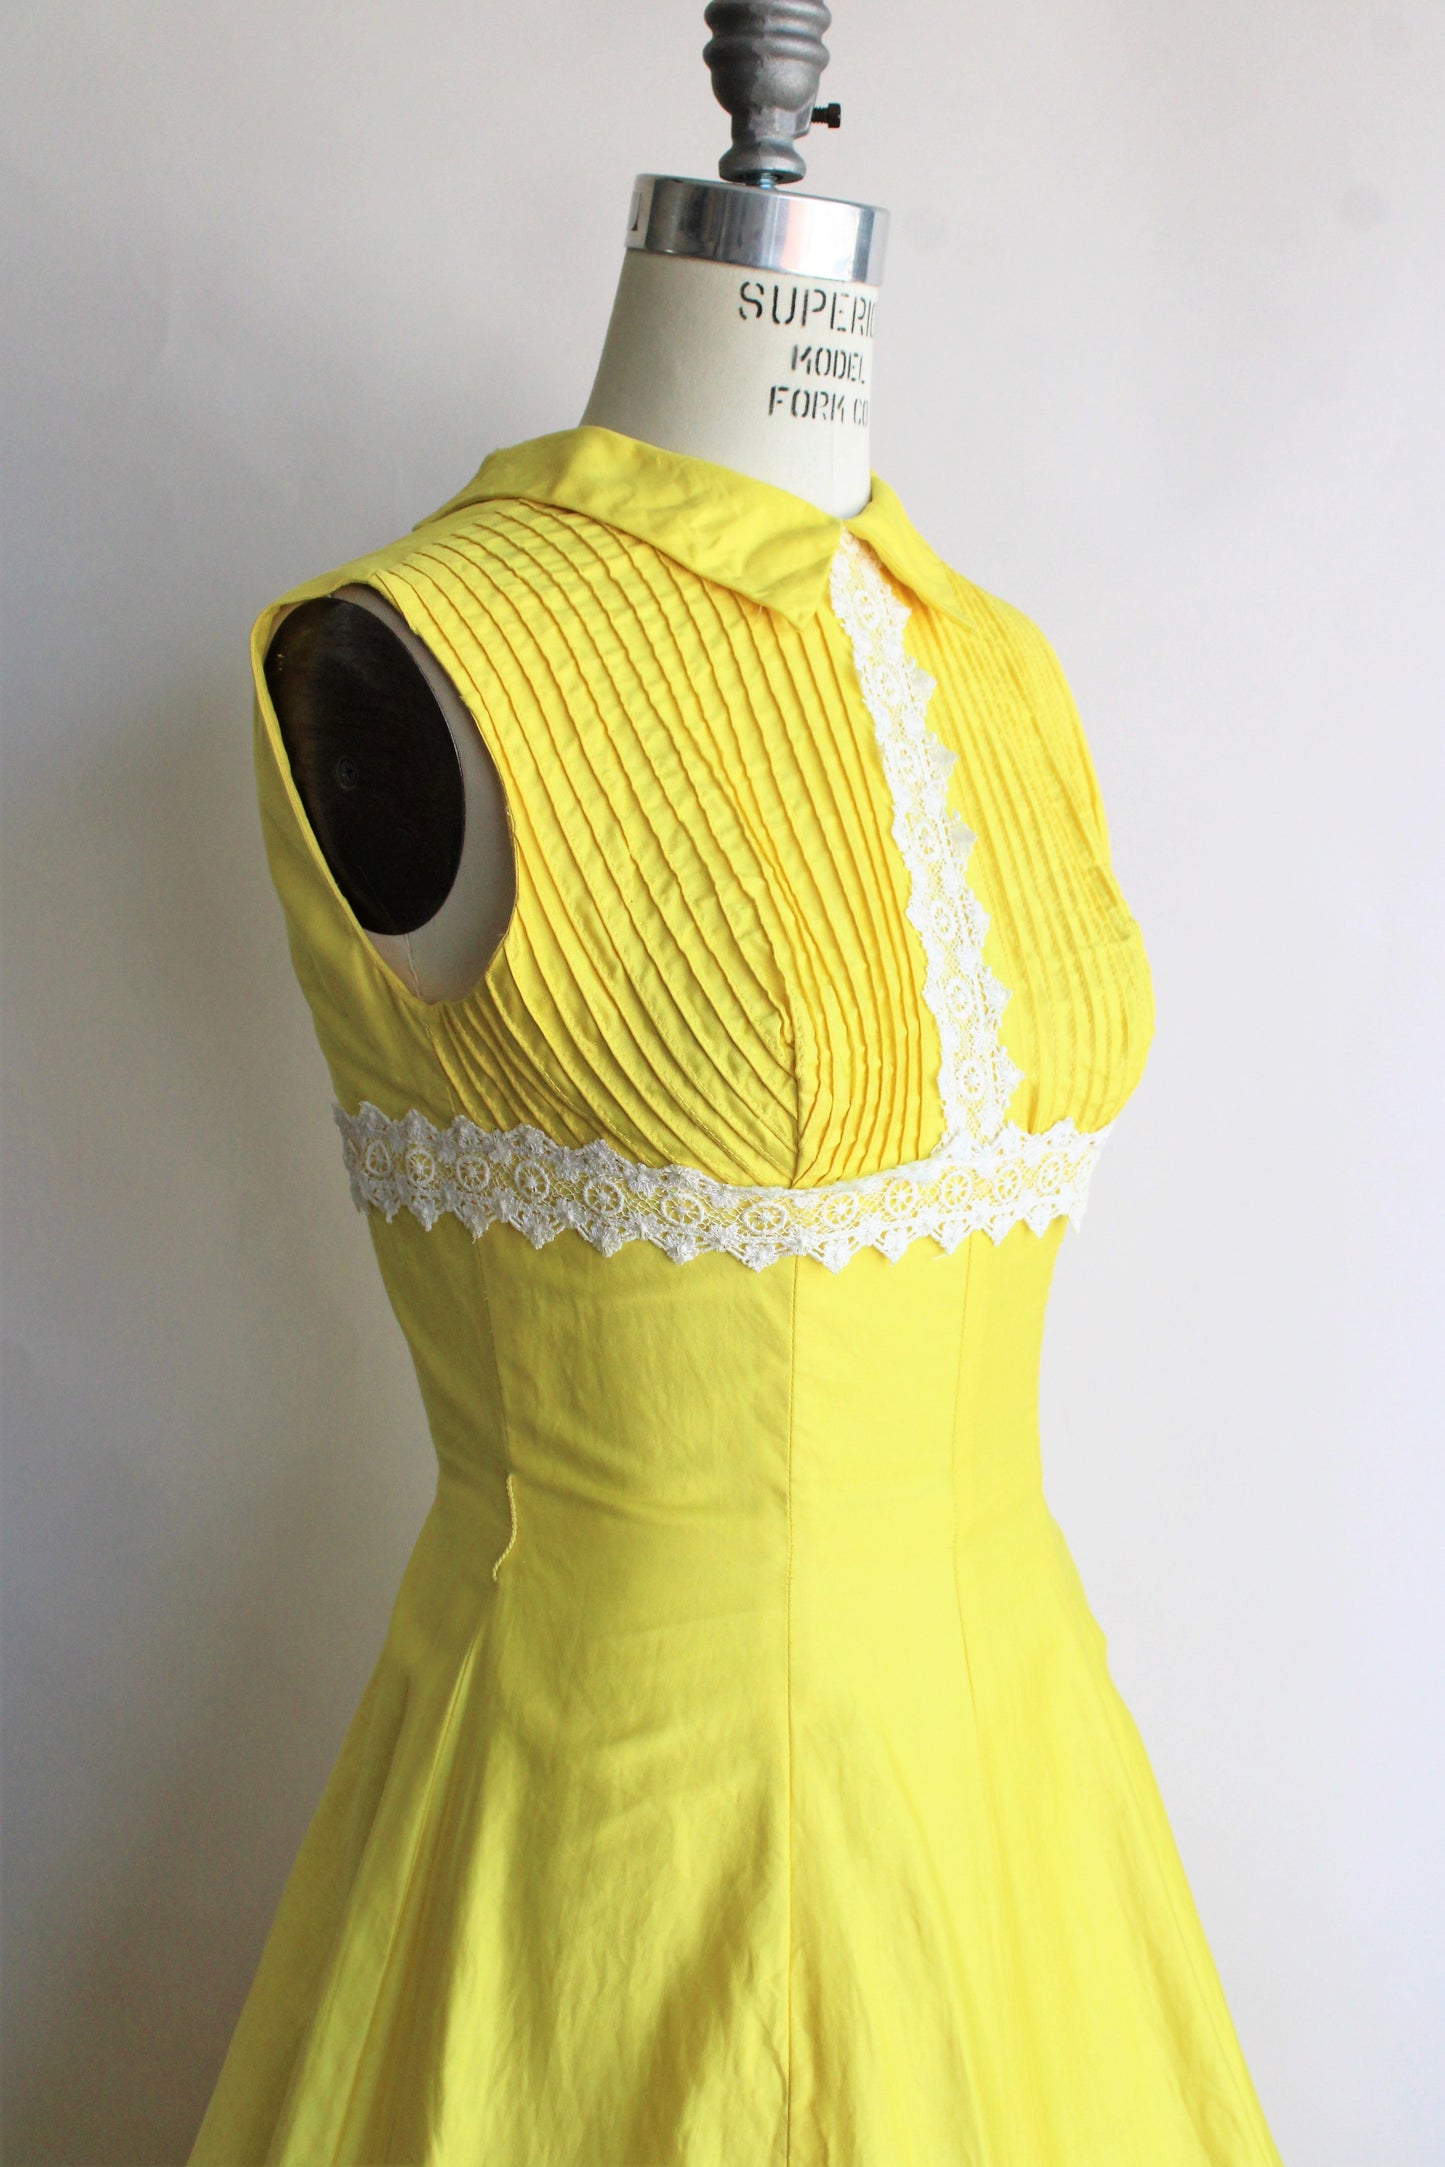 Vintage 1960s Yellow Cotton Dress with White Lace Trim by Teena Paige